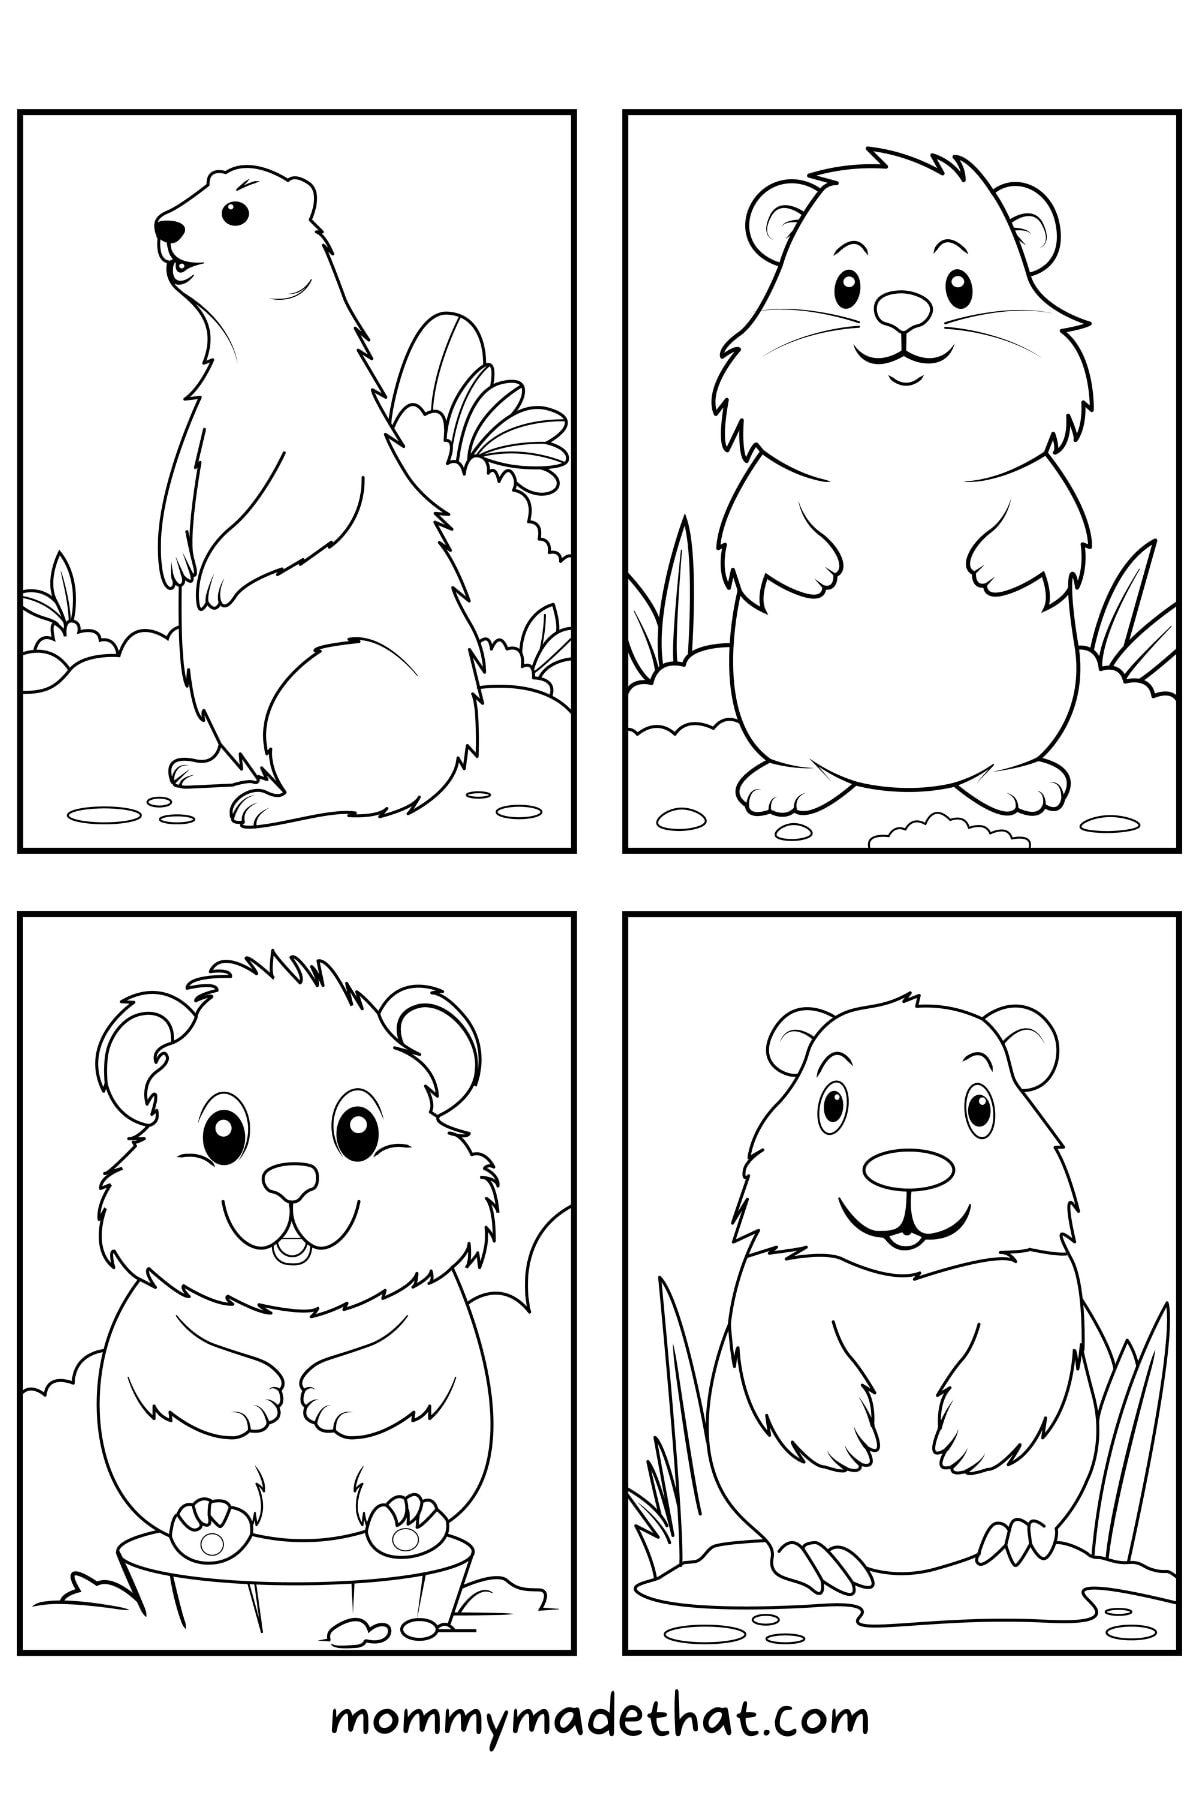 Groundhog day coloring pages.